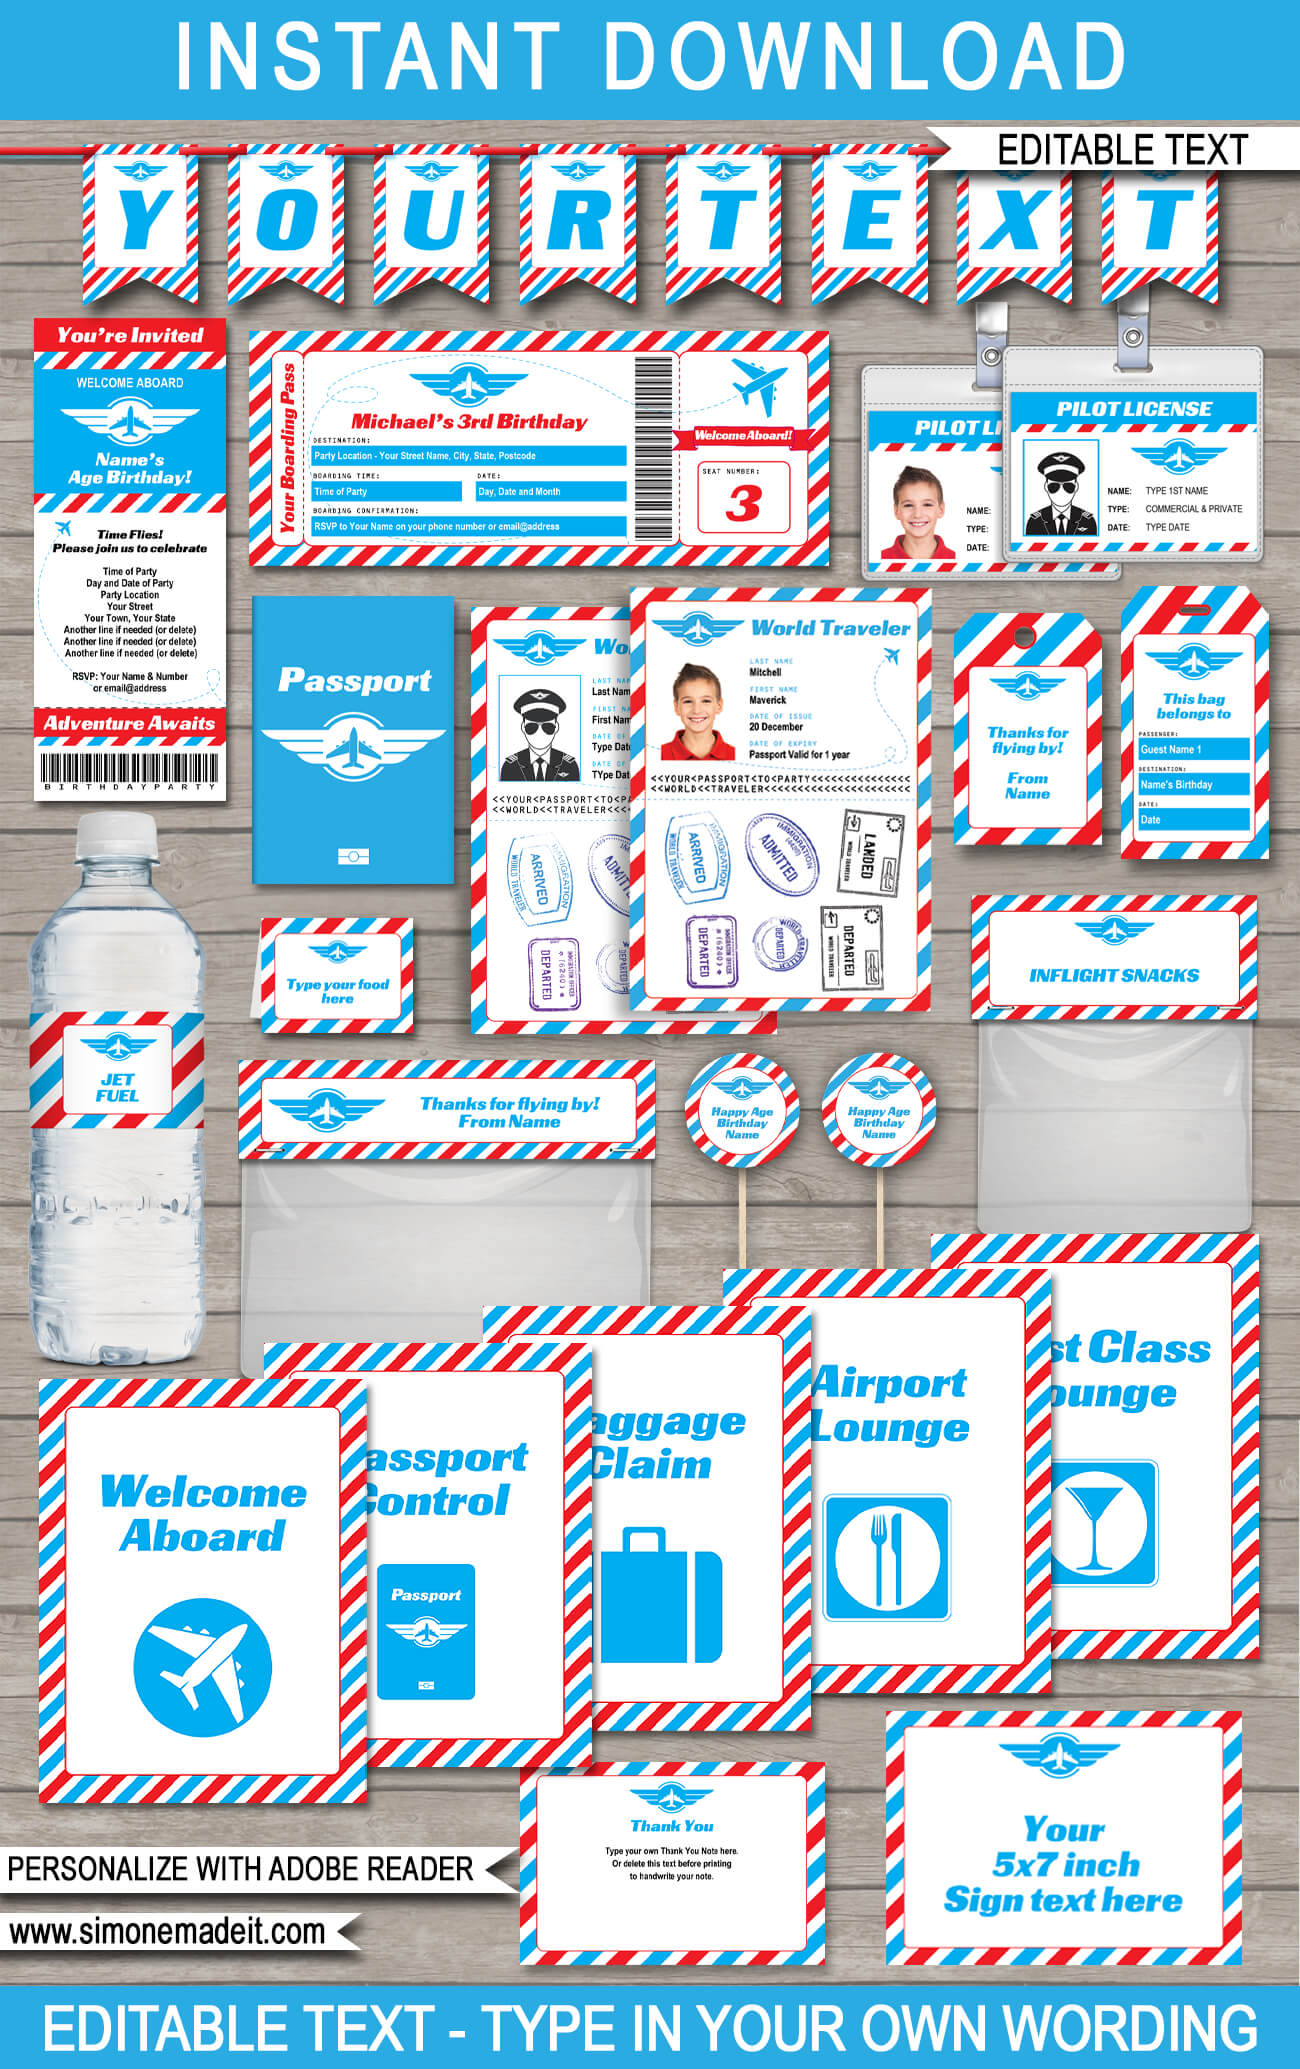 Airplane Party Printables, Invitations, Decorations | Luggage Tags | Passport | Boarding Pass | Airport Signs | Birthday Party | Editable DIY Theme Templates | INSTANT DOWNLOADS $12.50 via SIMONEmadeit.com